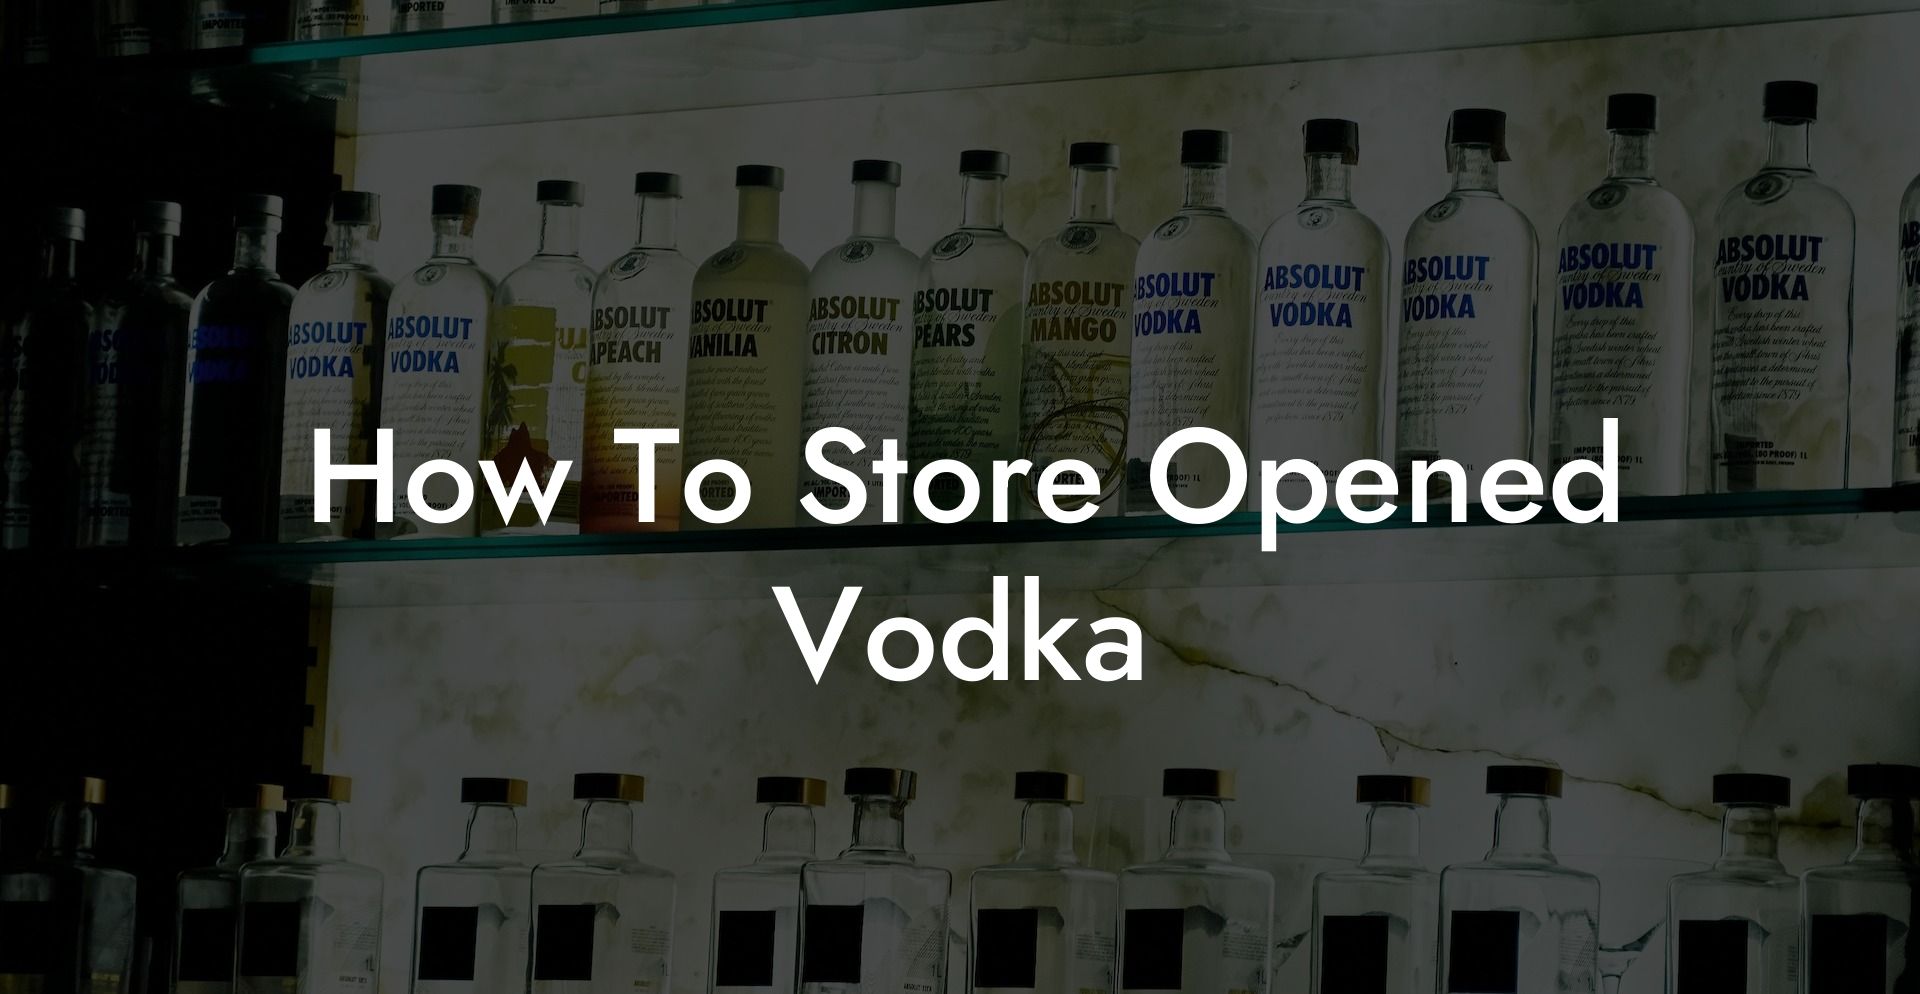 How To Store Opened Vodka